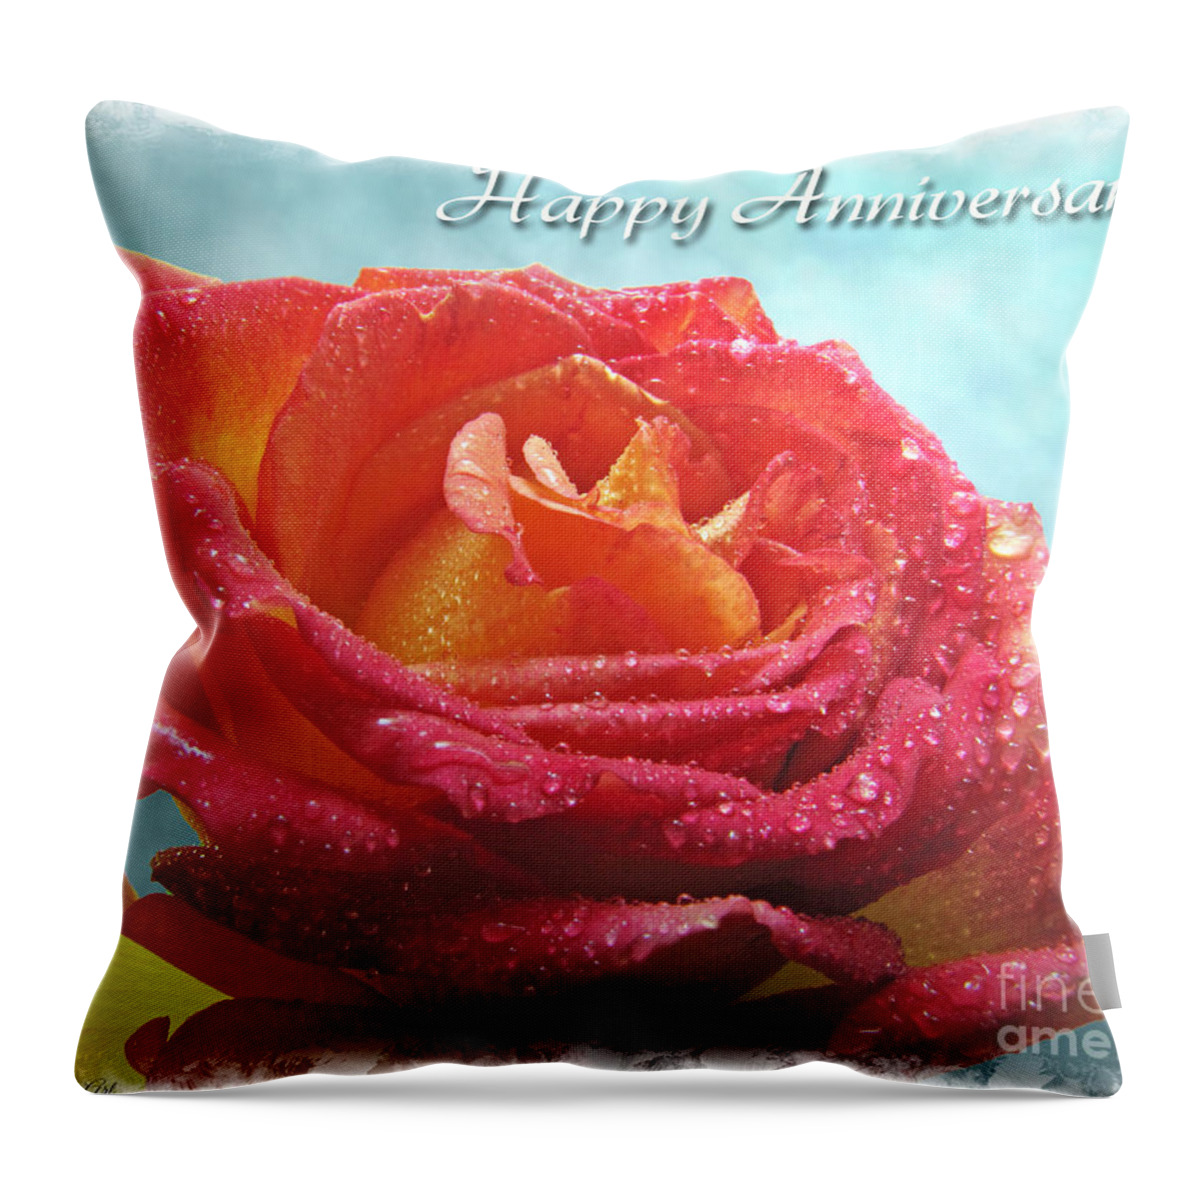 Dew Throw Pillow featuring the photograph Happy Anniversary Rose by Debbie Portwood